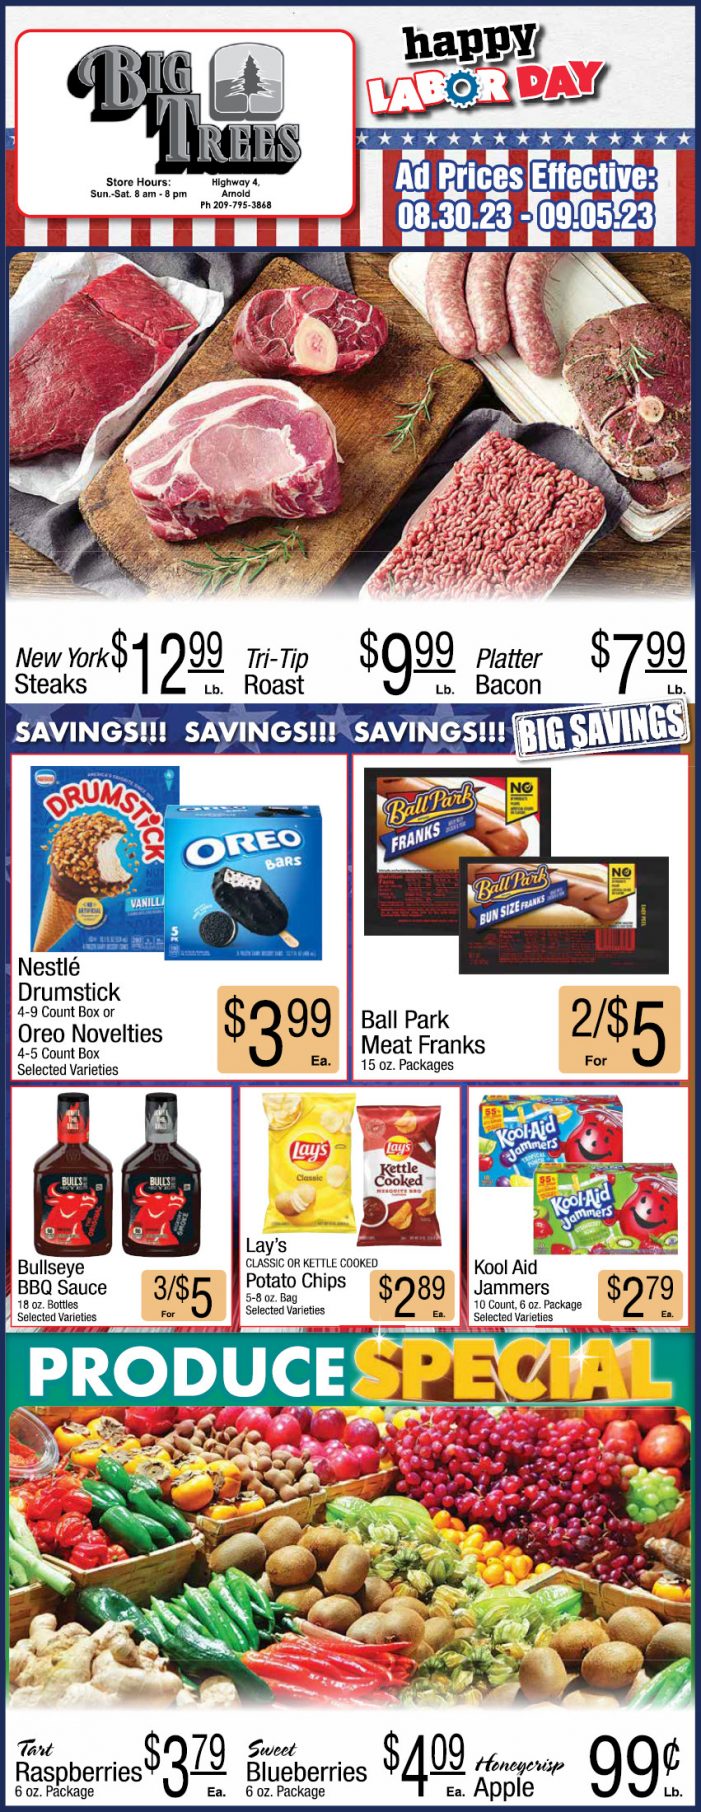 Big Trees Market Weekly Ad, Grocery, Produce, Meat & Deli Specials Through September 5th!  Shop Local & Save!